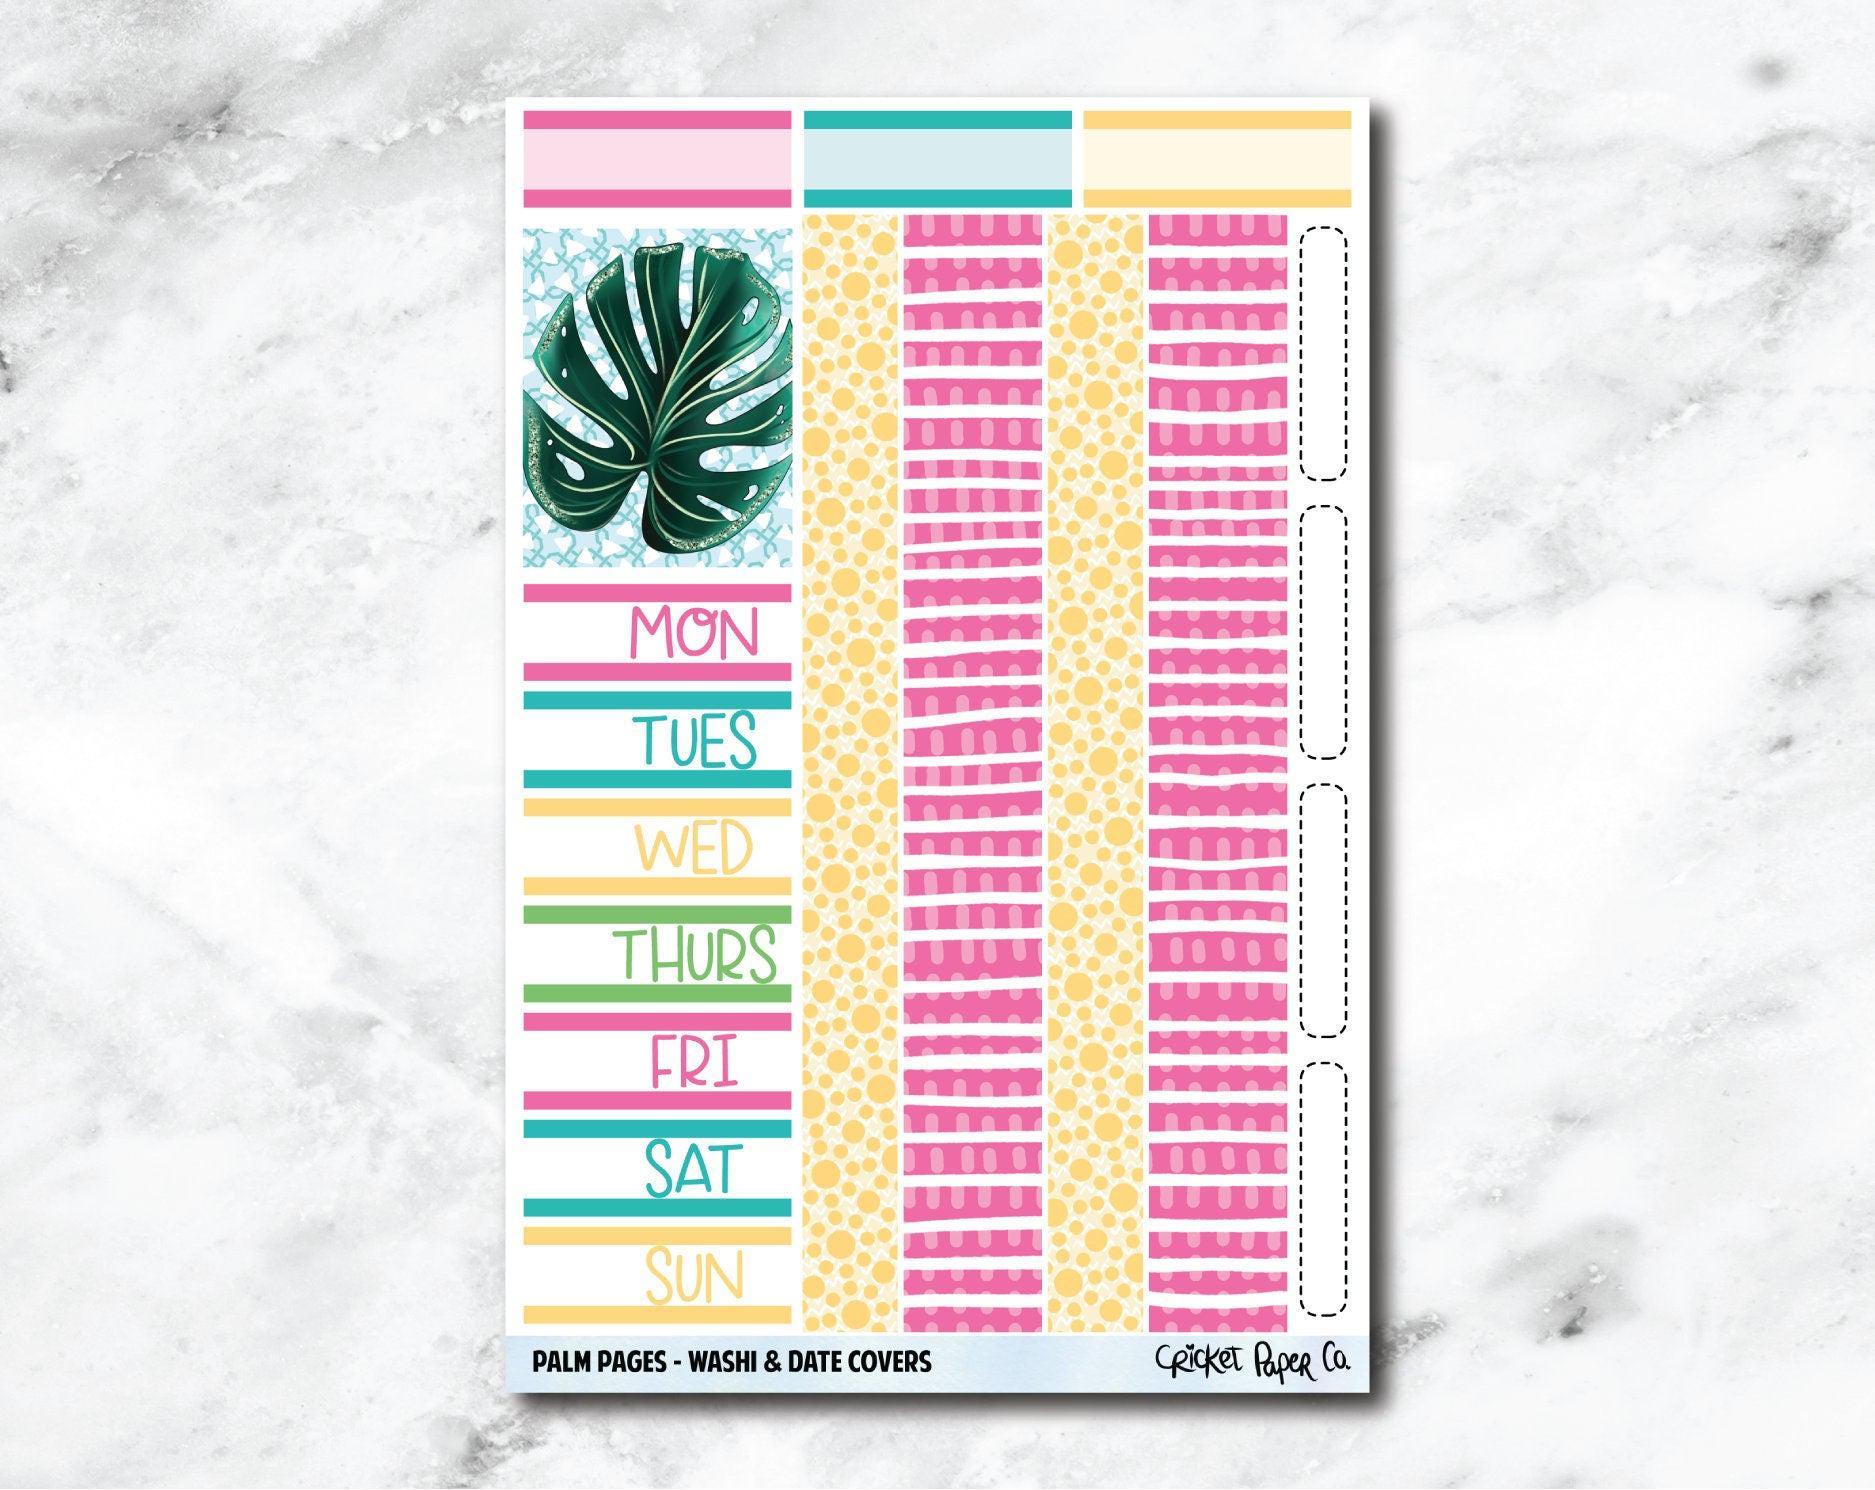 Date Covers and Bottom Washi Planner Stickers - Palm Pages-Cricket Paper Co.